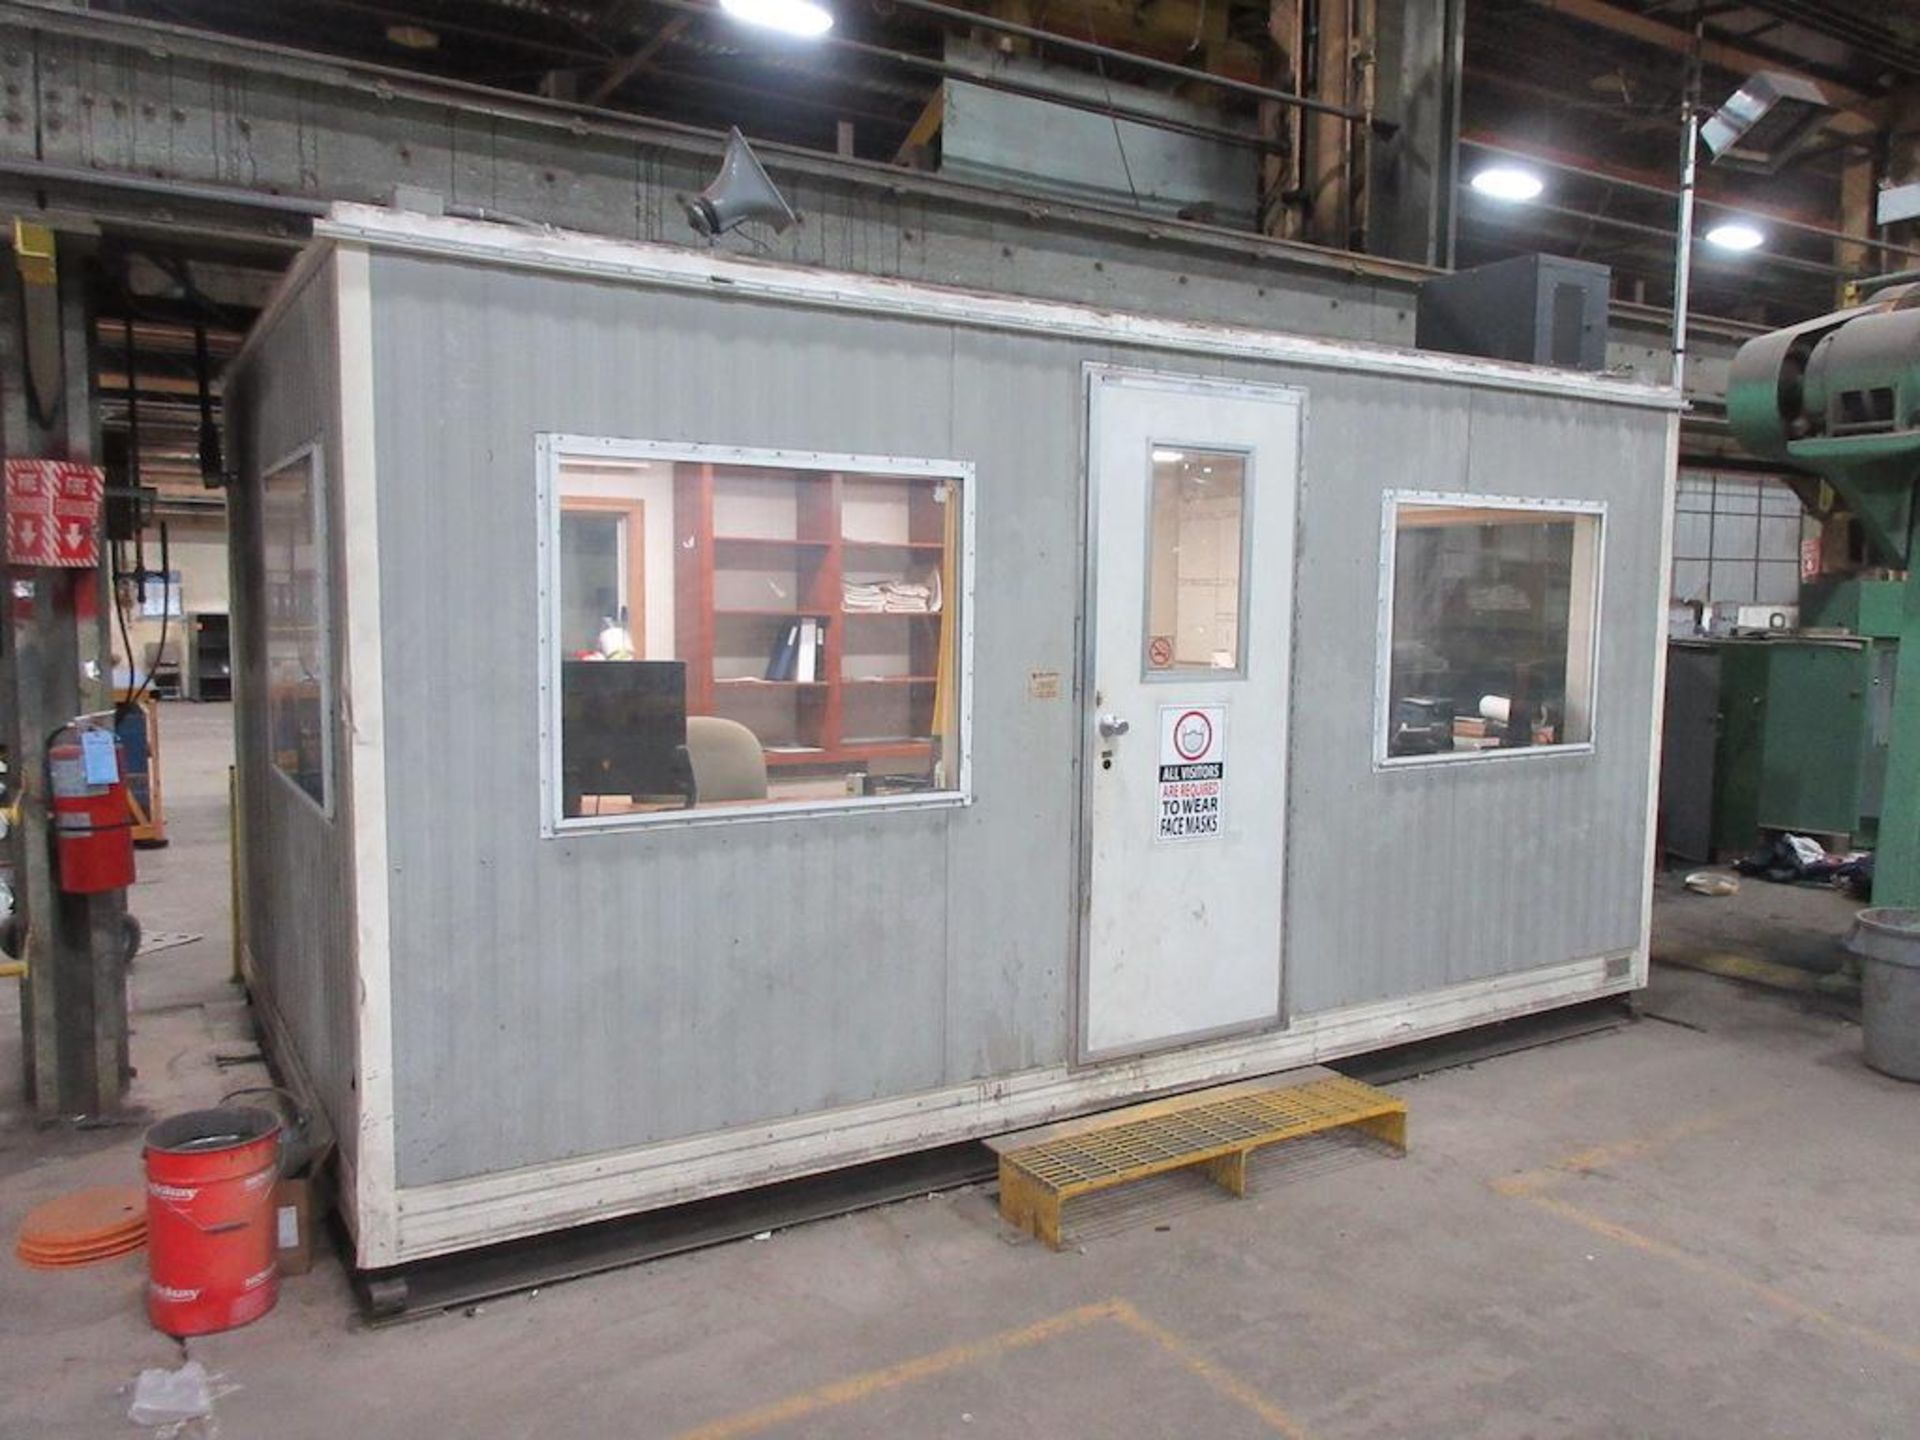 2011 DESIGN SPACE TRAILERS 10' X 16' PORTABLE OFFICE, SN 1253, INCLUDES 2 DESKS, 2 CHAIRS, 2 FILING